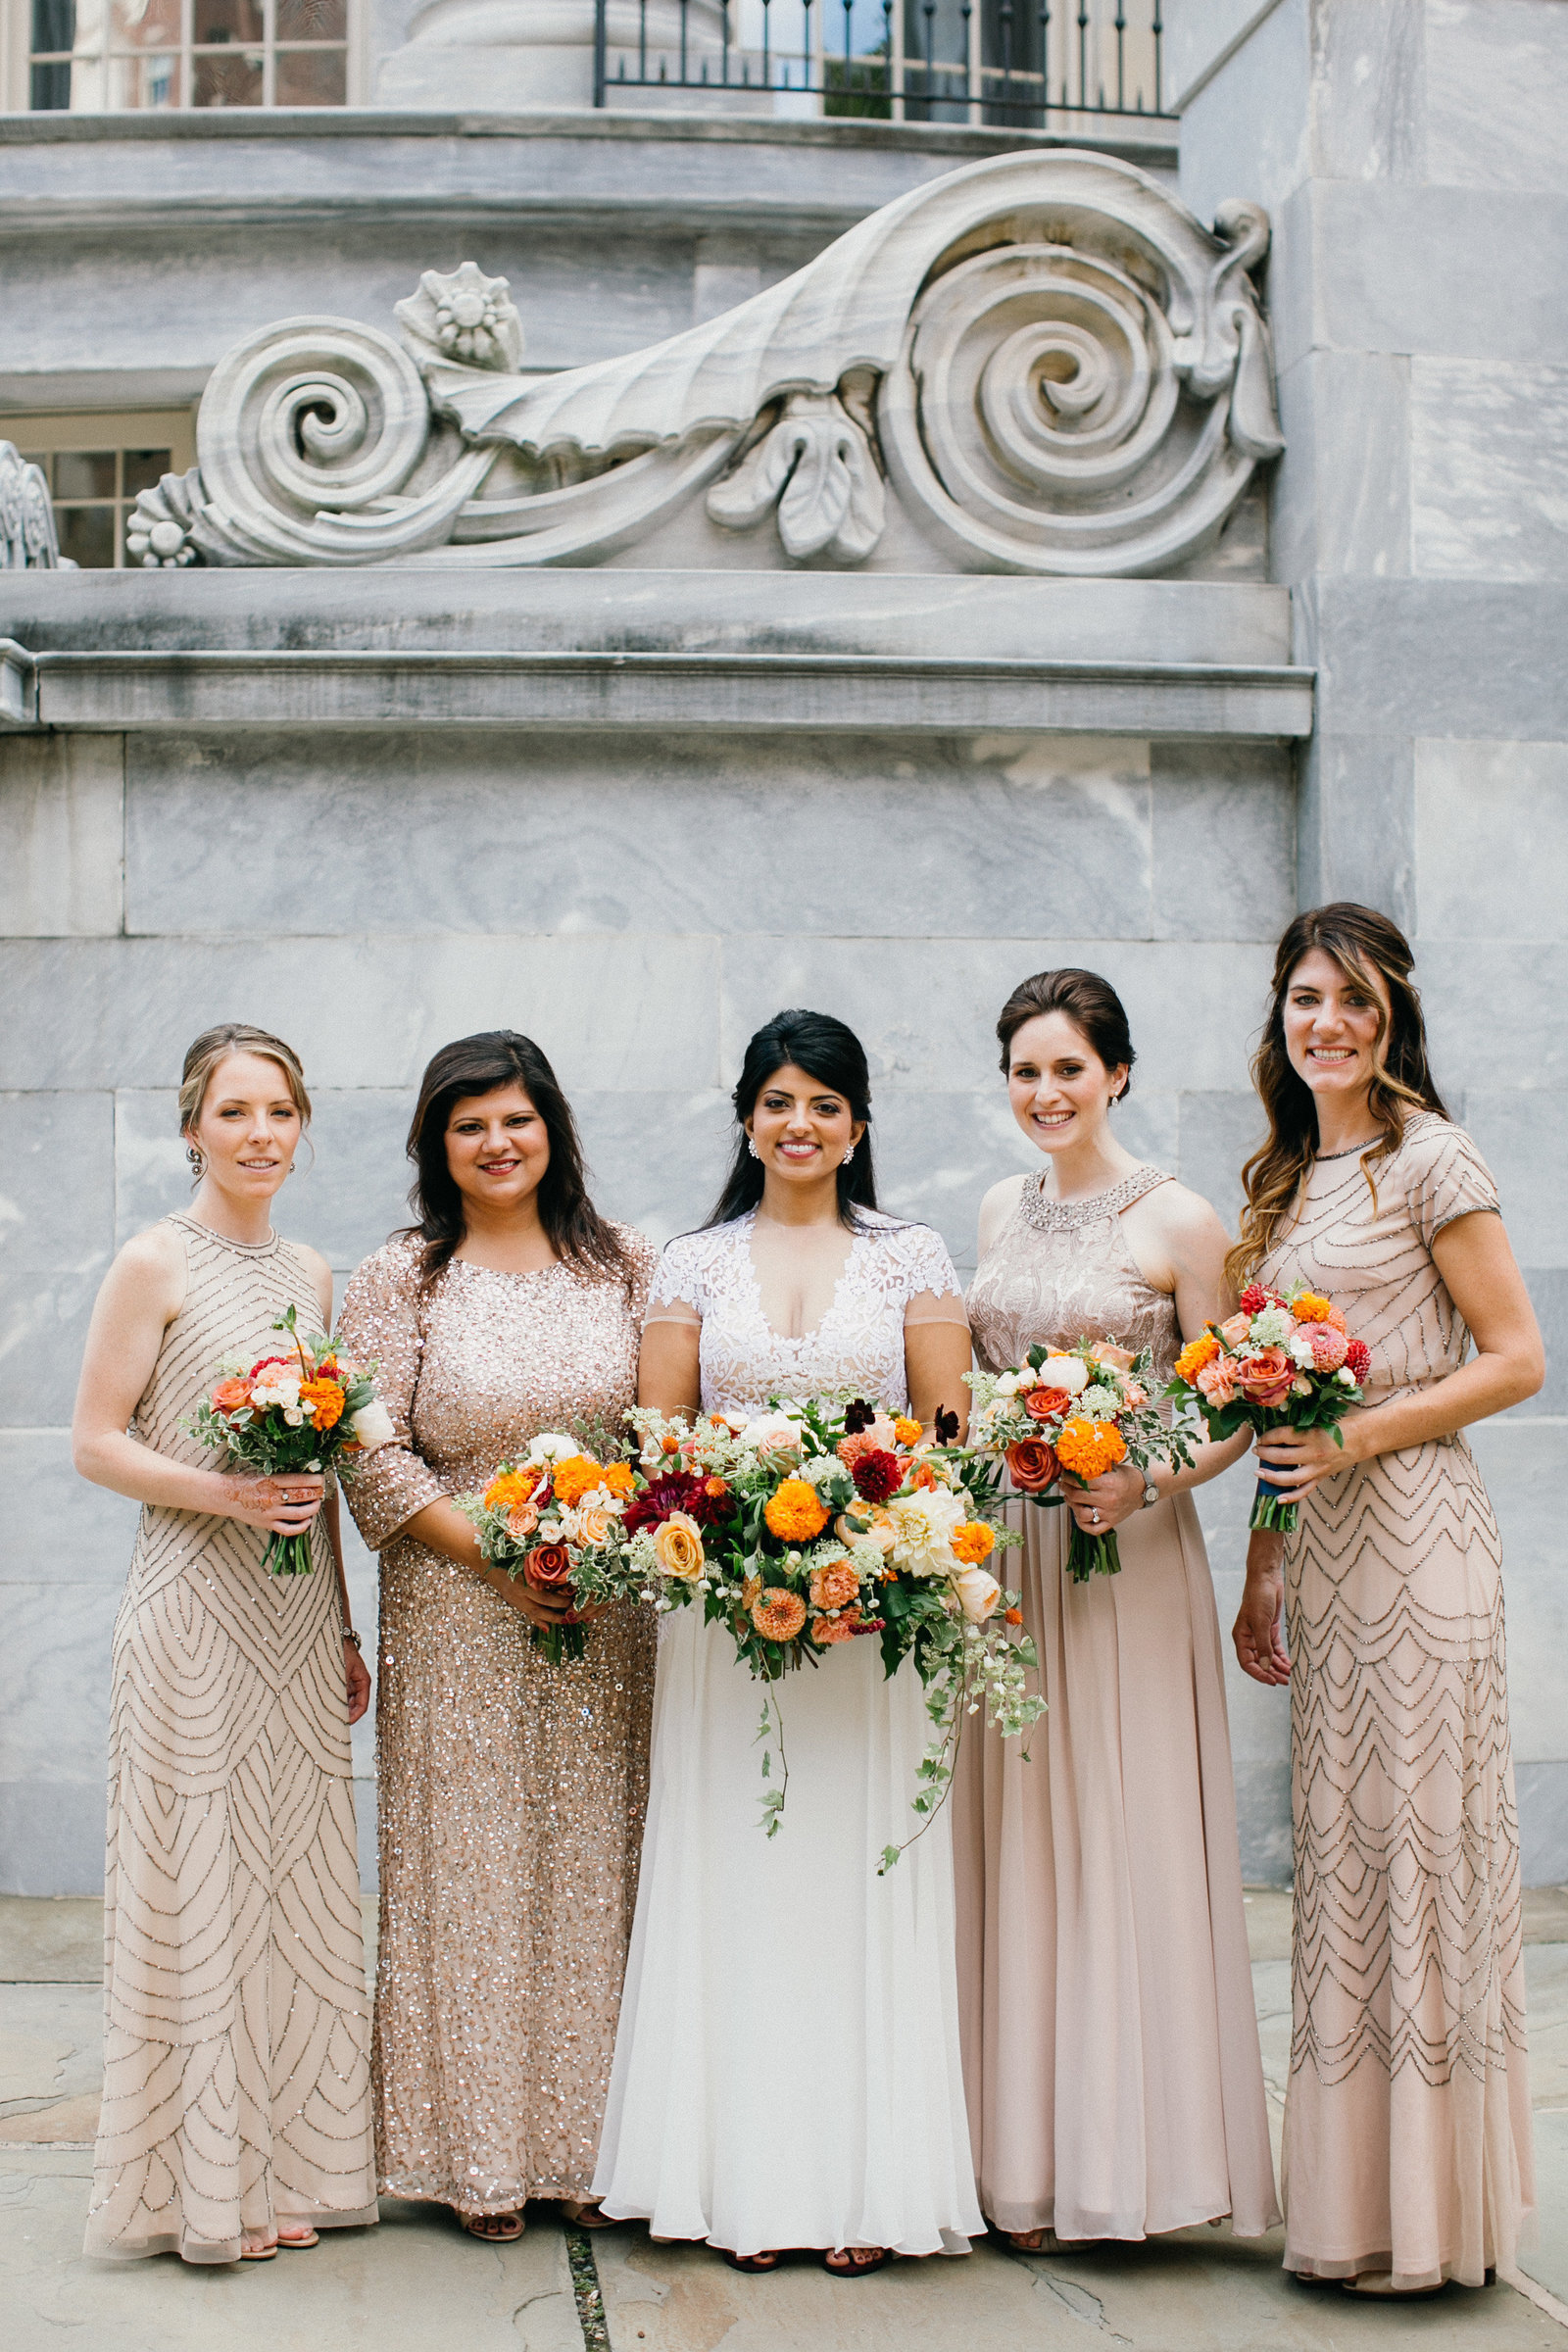 Bride and her bridesmaids photographed at this historic Philadelphia landmark before the wedding ceremony.